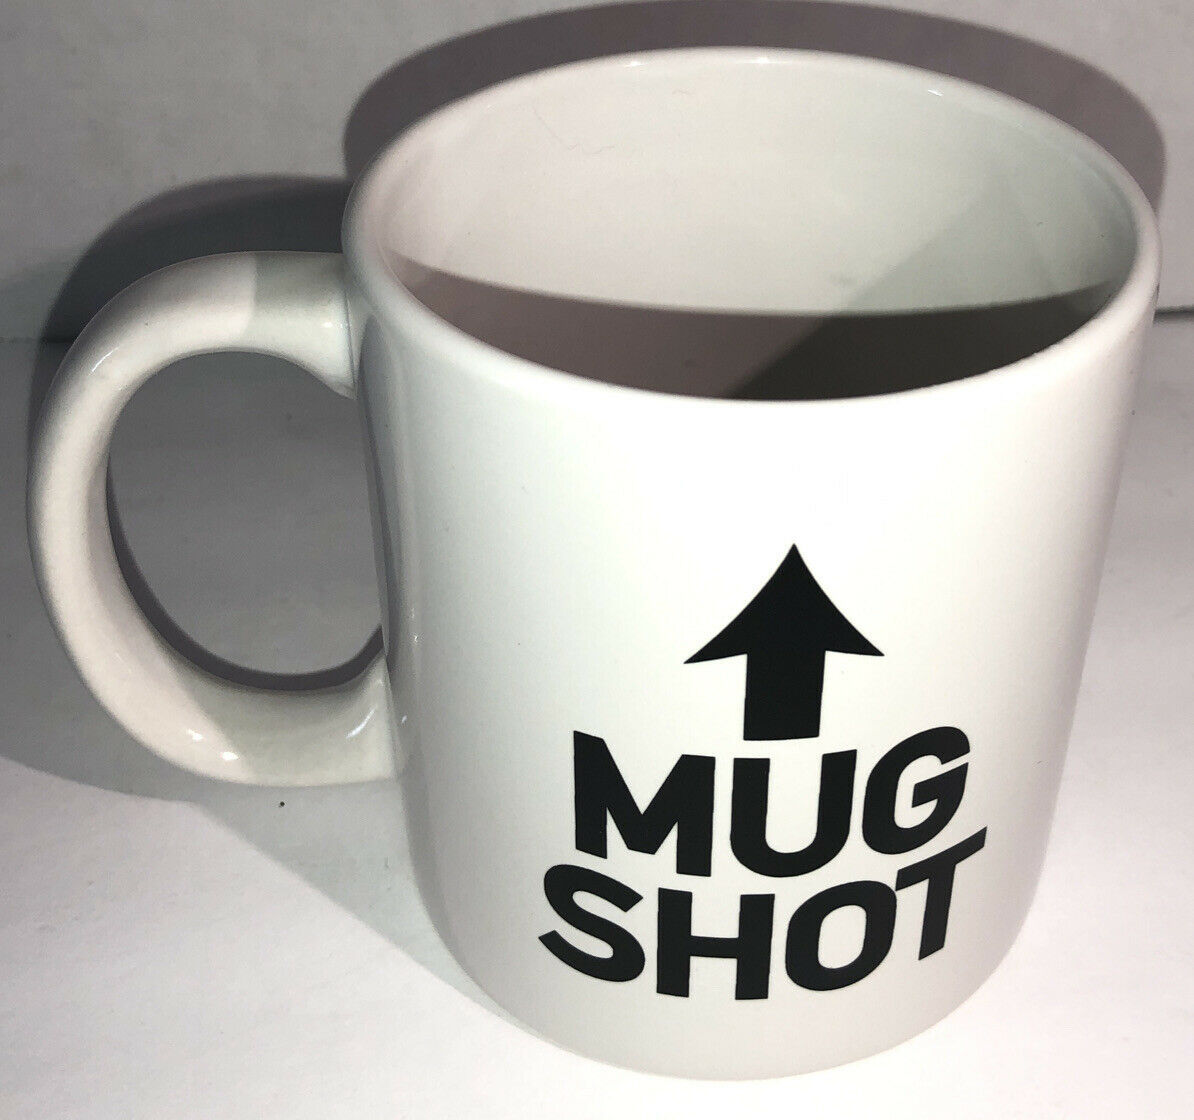 Details about   Mug Shot Coffee Tea Mug Cup Gift Office Work-Free Gift Wrap-New-SHIPS N 24 HOURS 